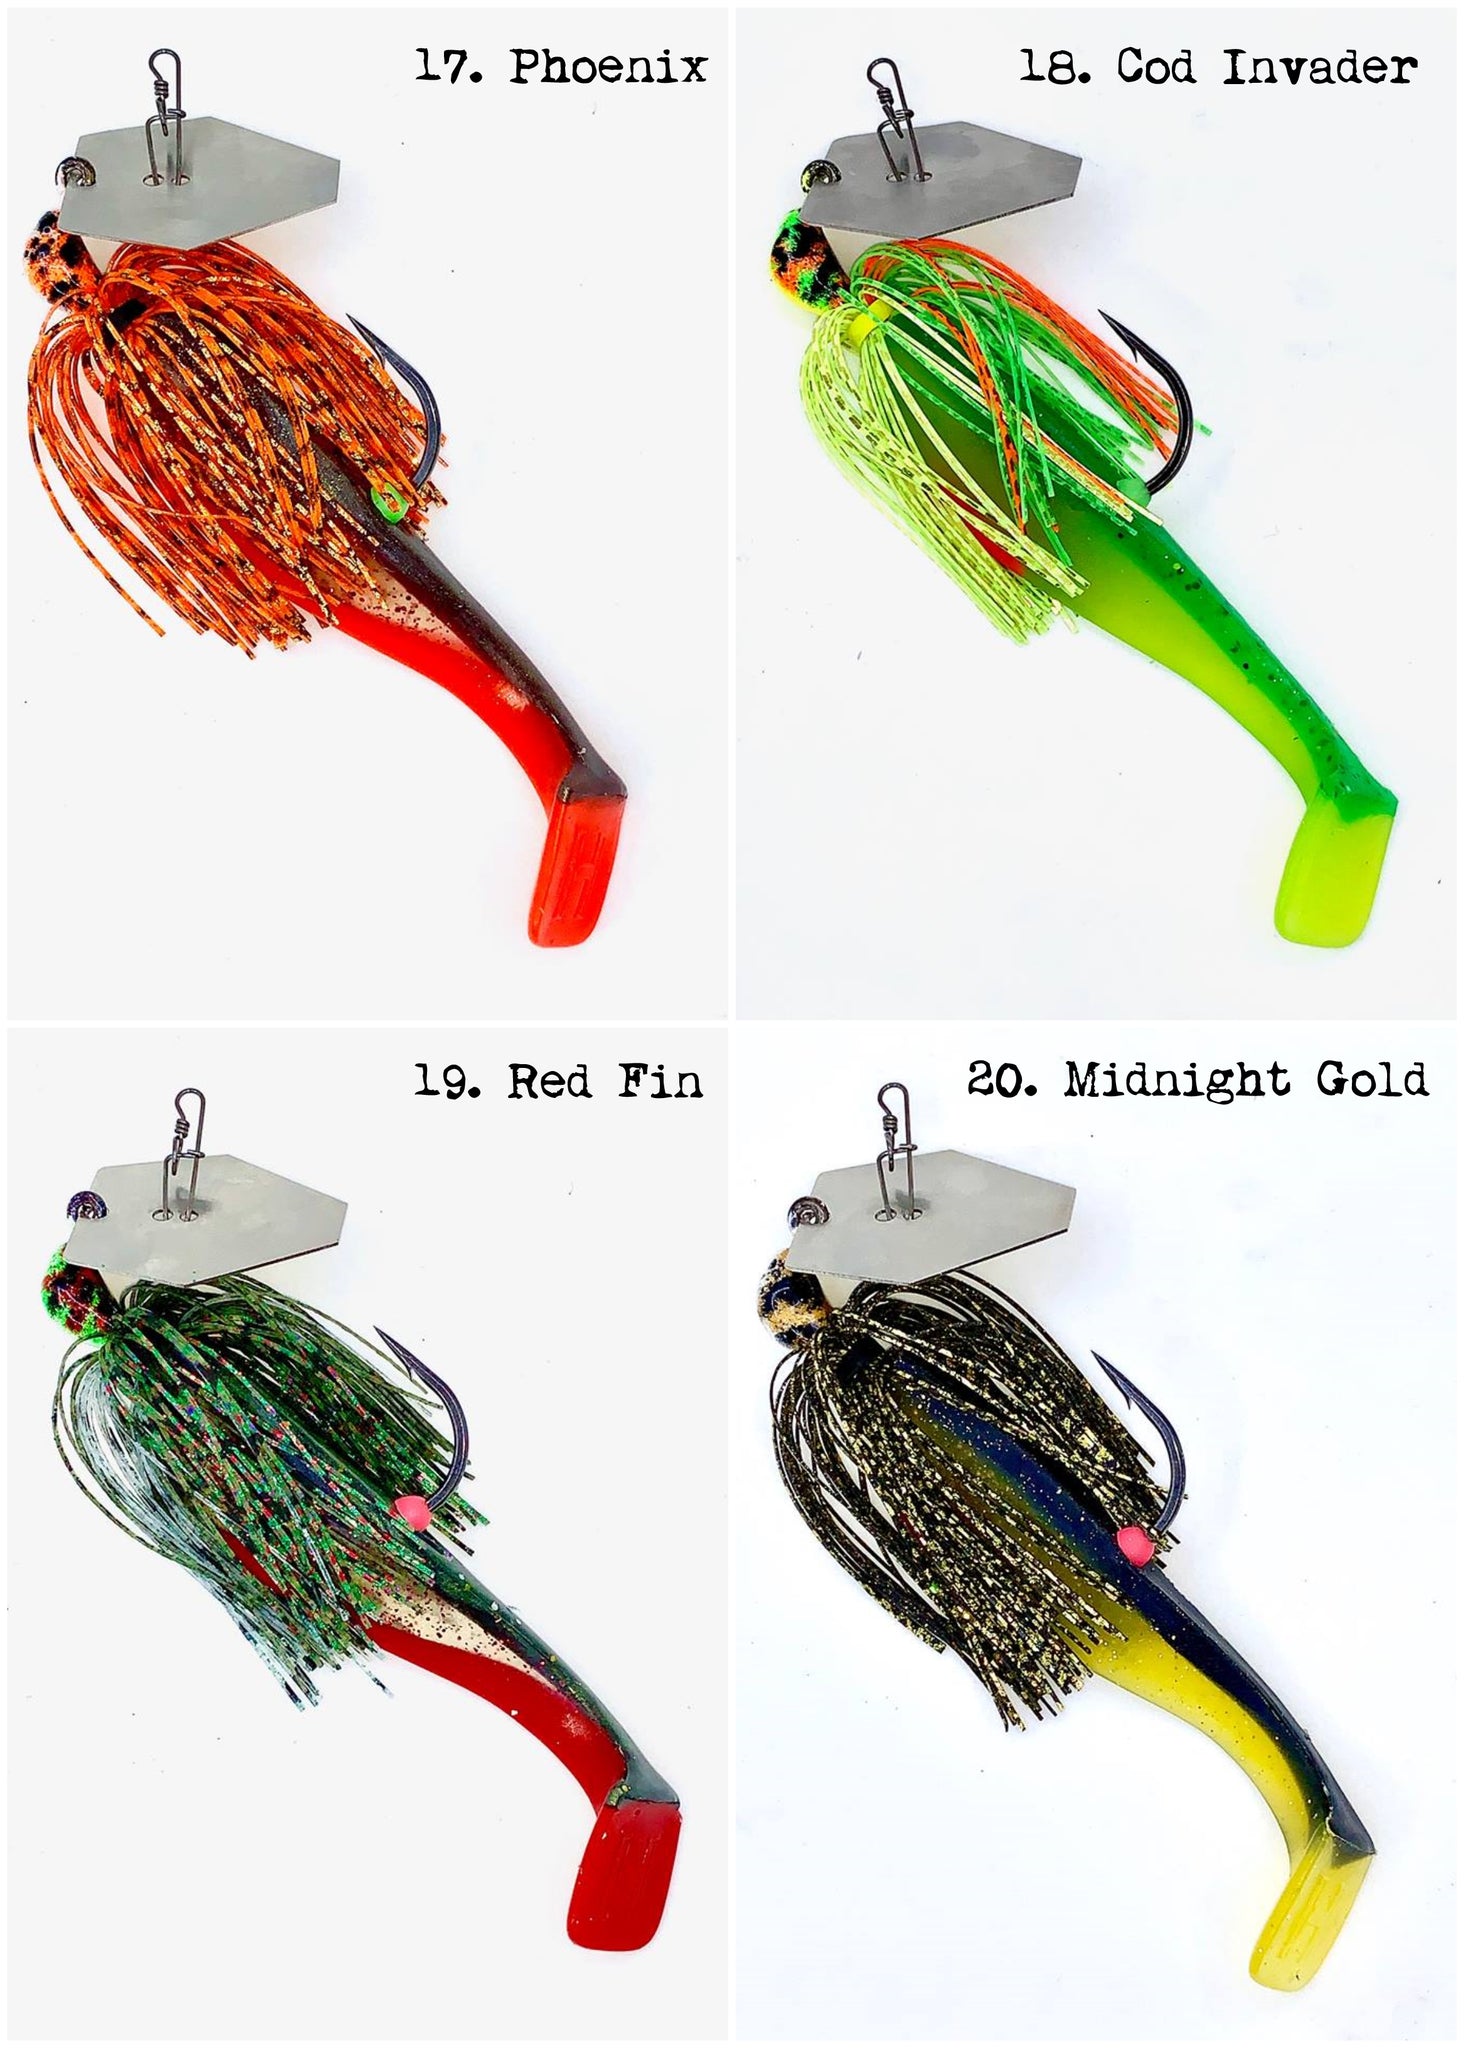 150mm 3/4oz Chatterbait – Cod King Lures